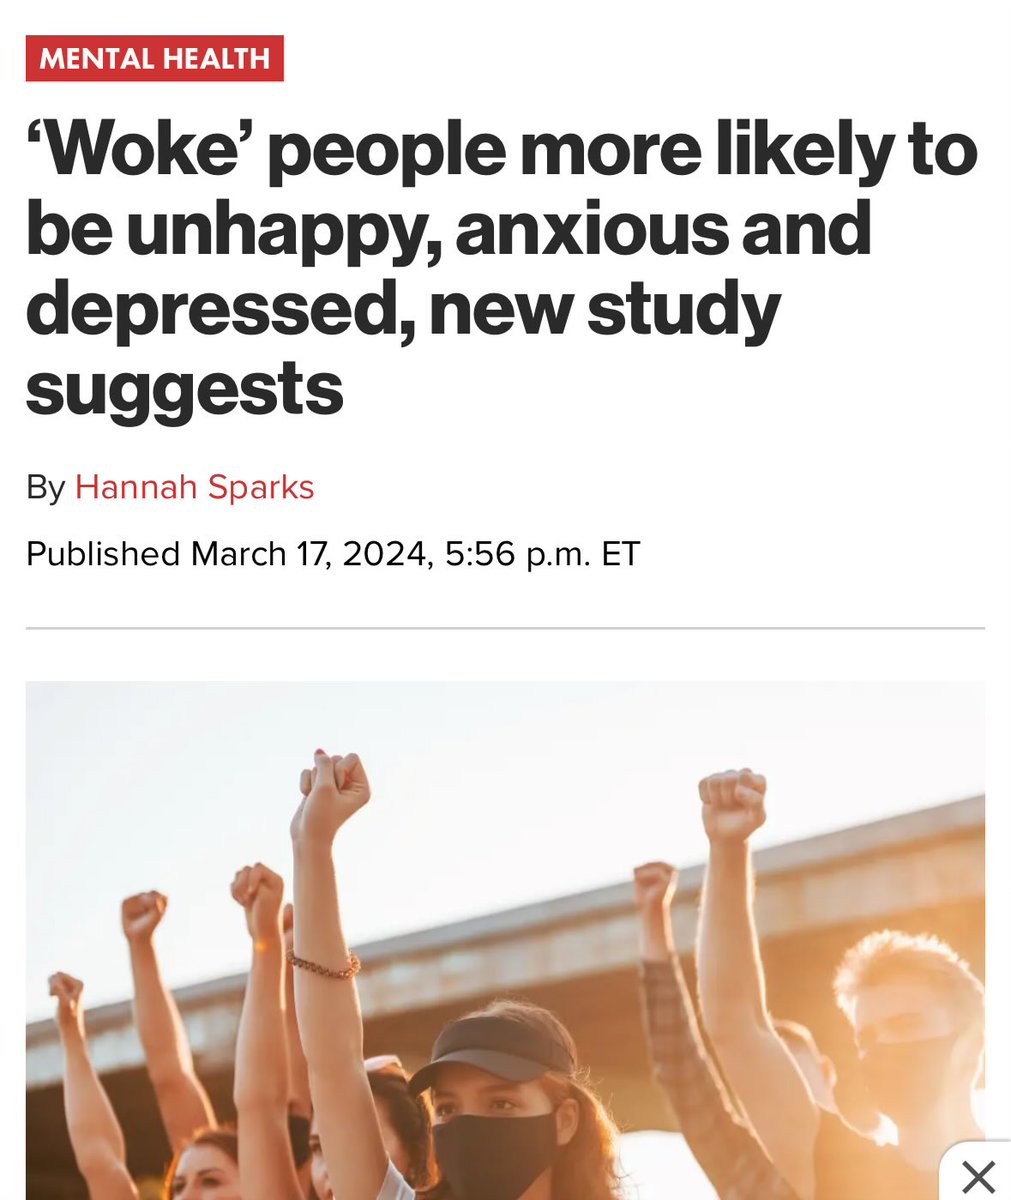 Non woke peeps are healthier and generally look better